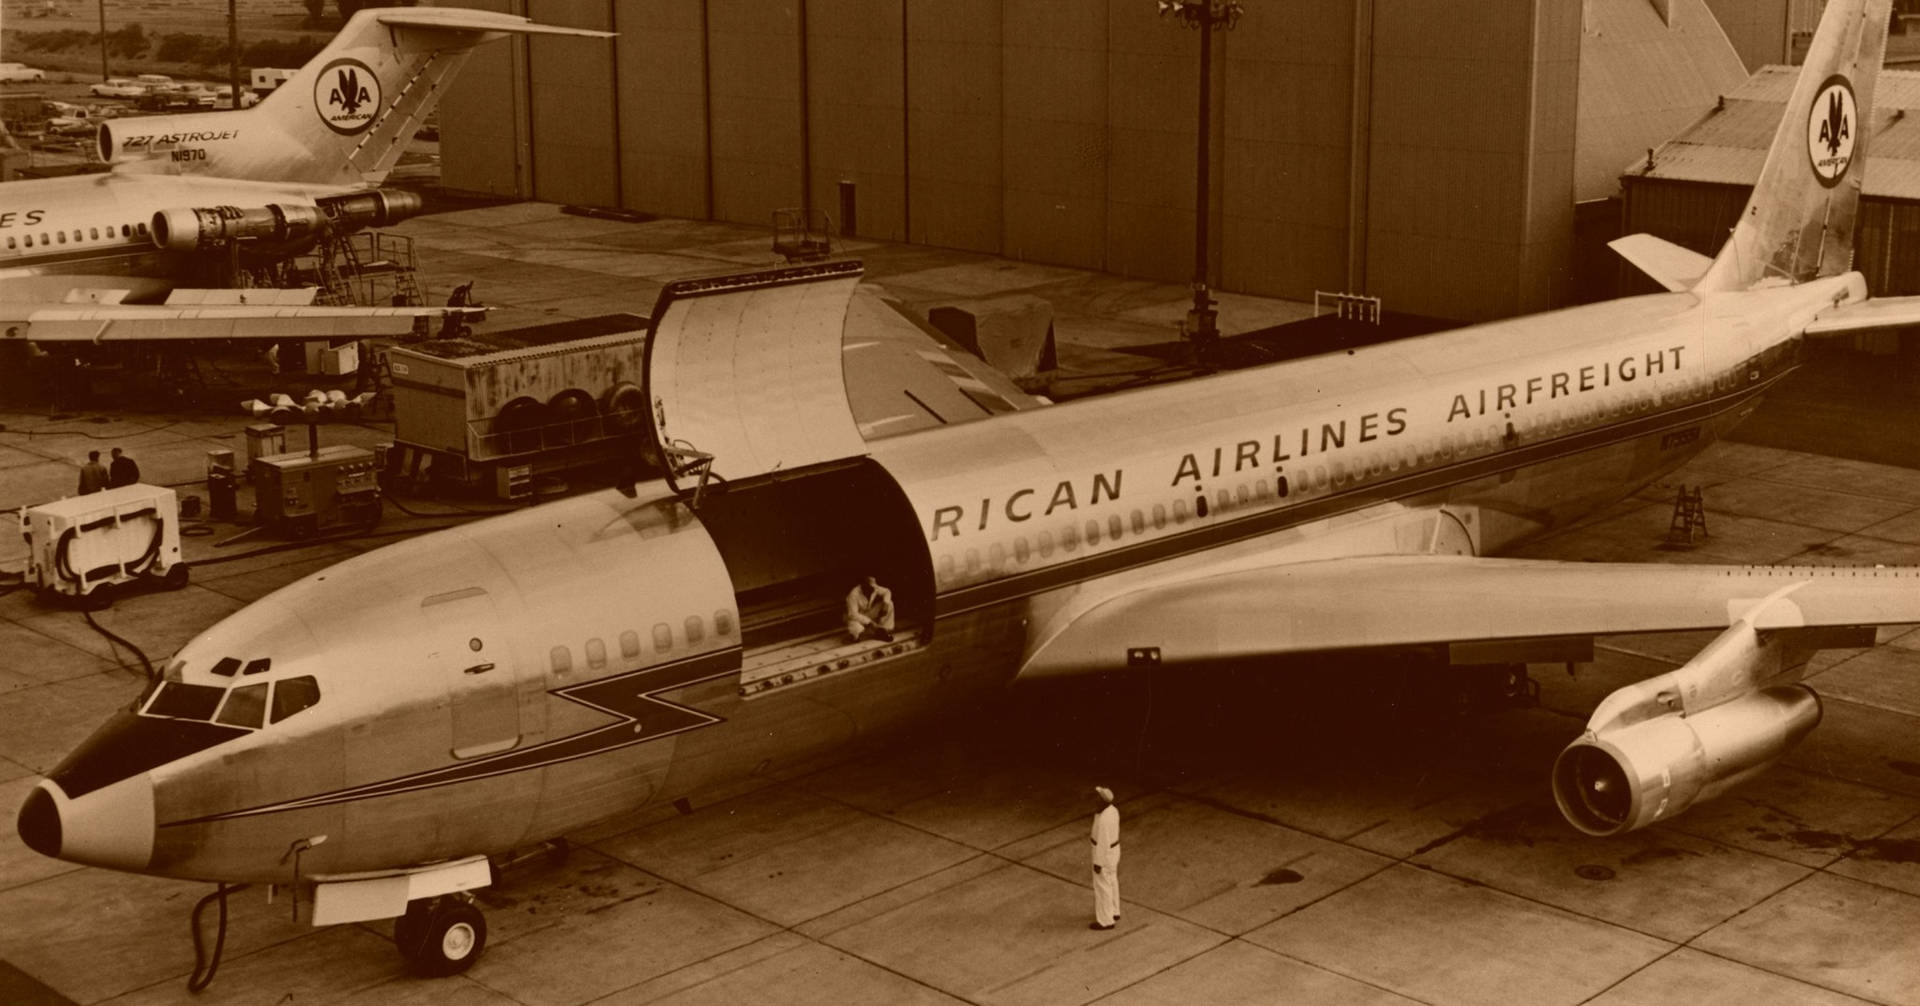 Vintage American Airlines Airfreight